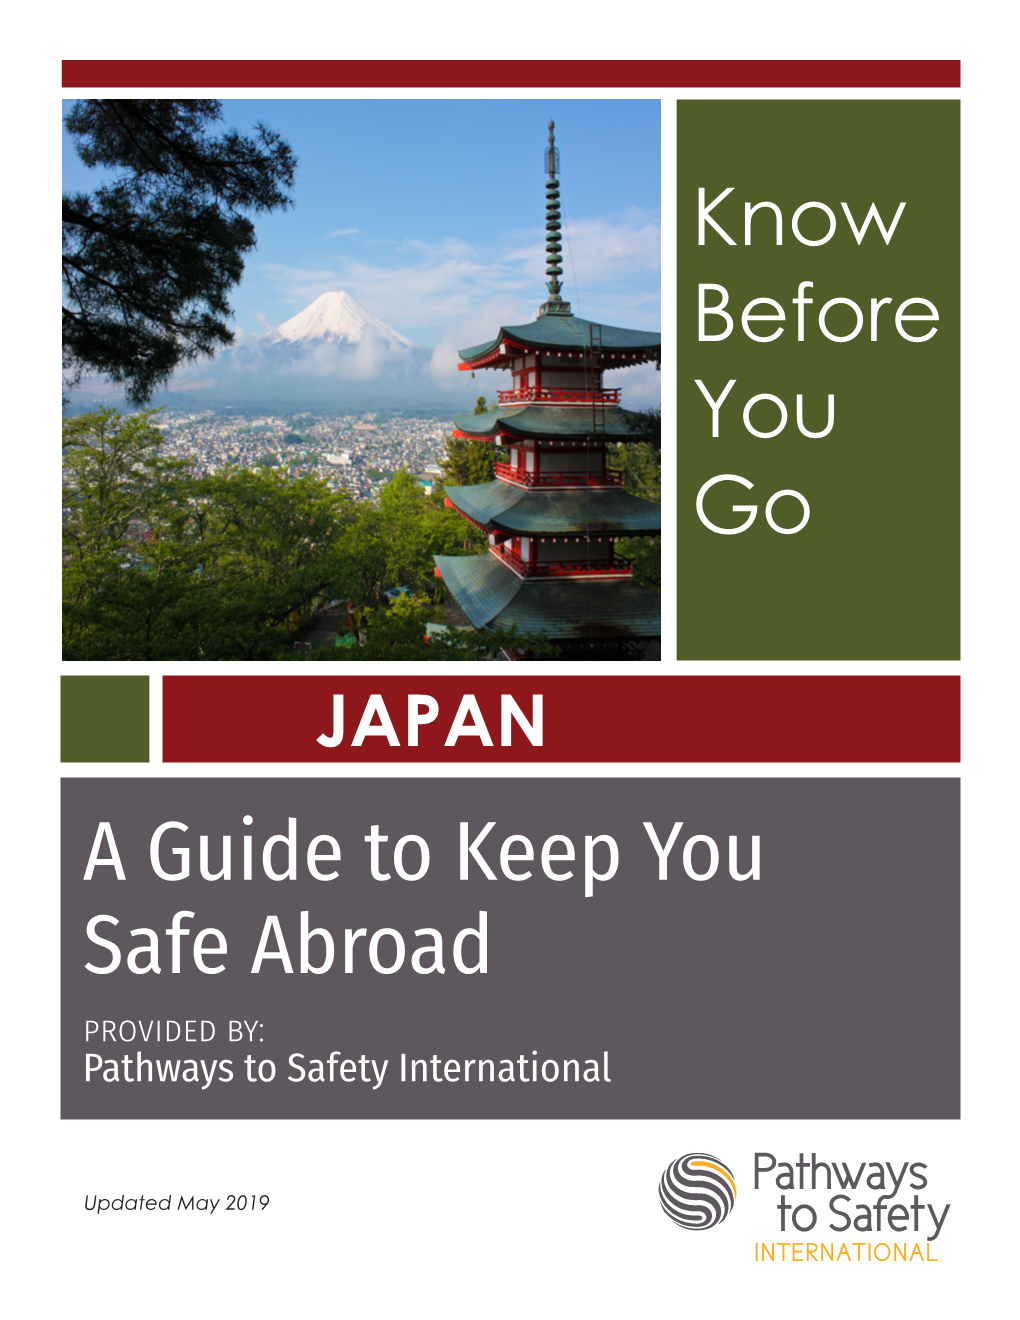 JAPAN a Guide to Keep You Safe Abroad Provided By: Pathways to Safety International